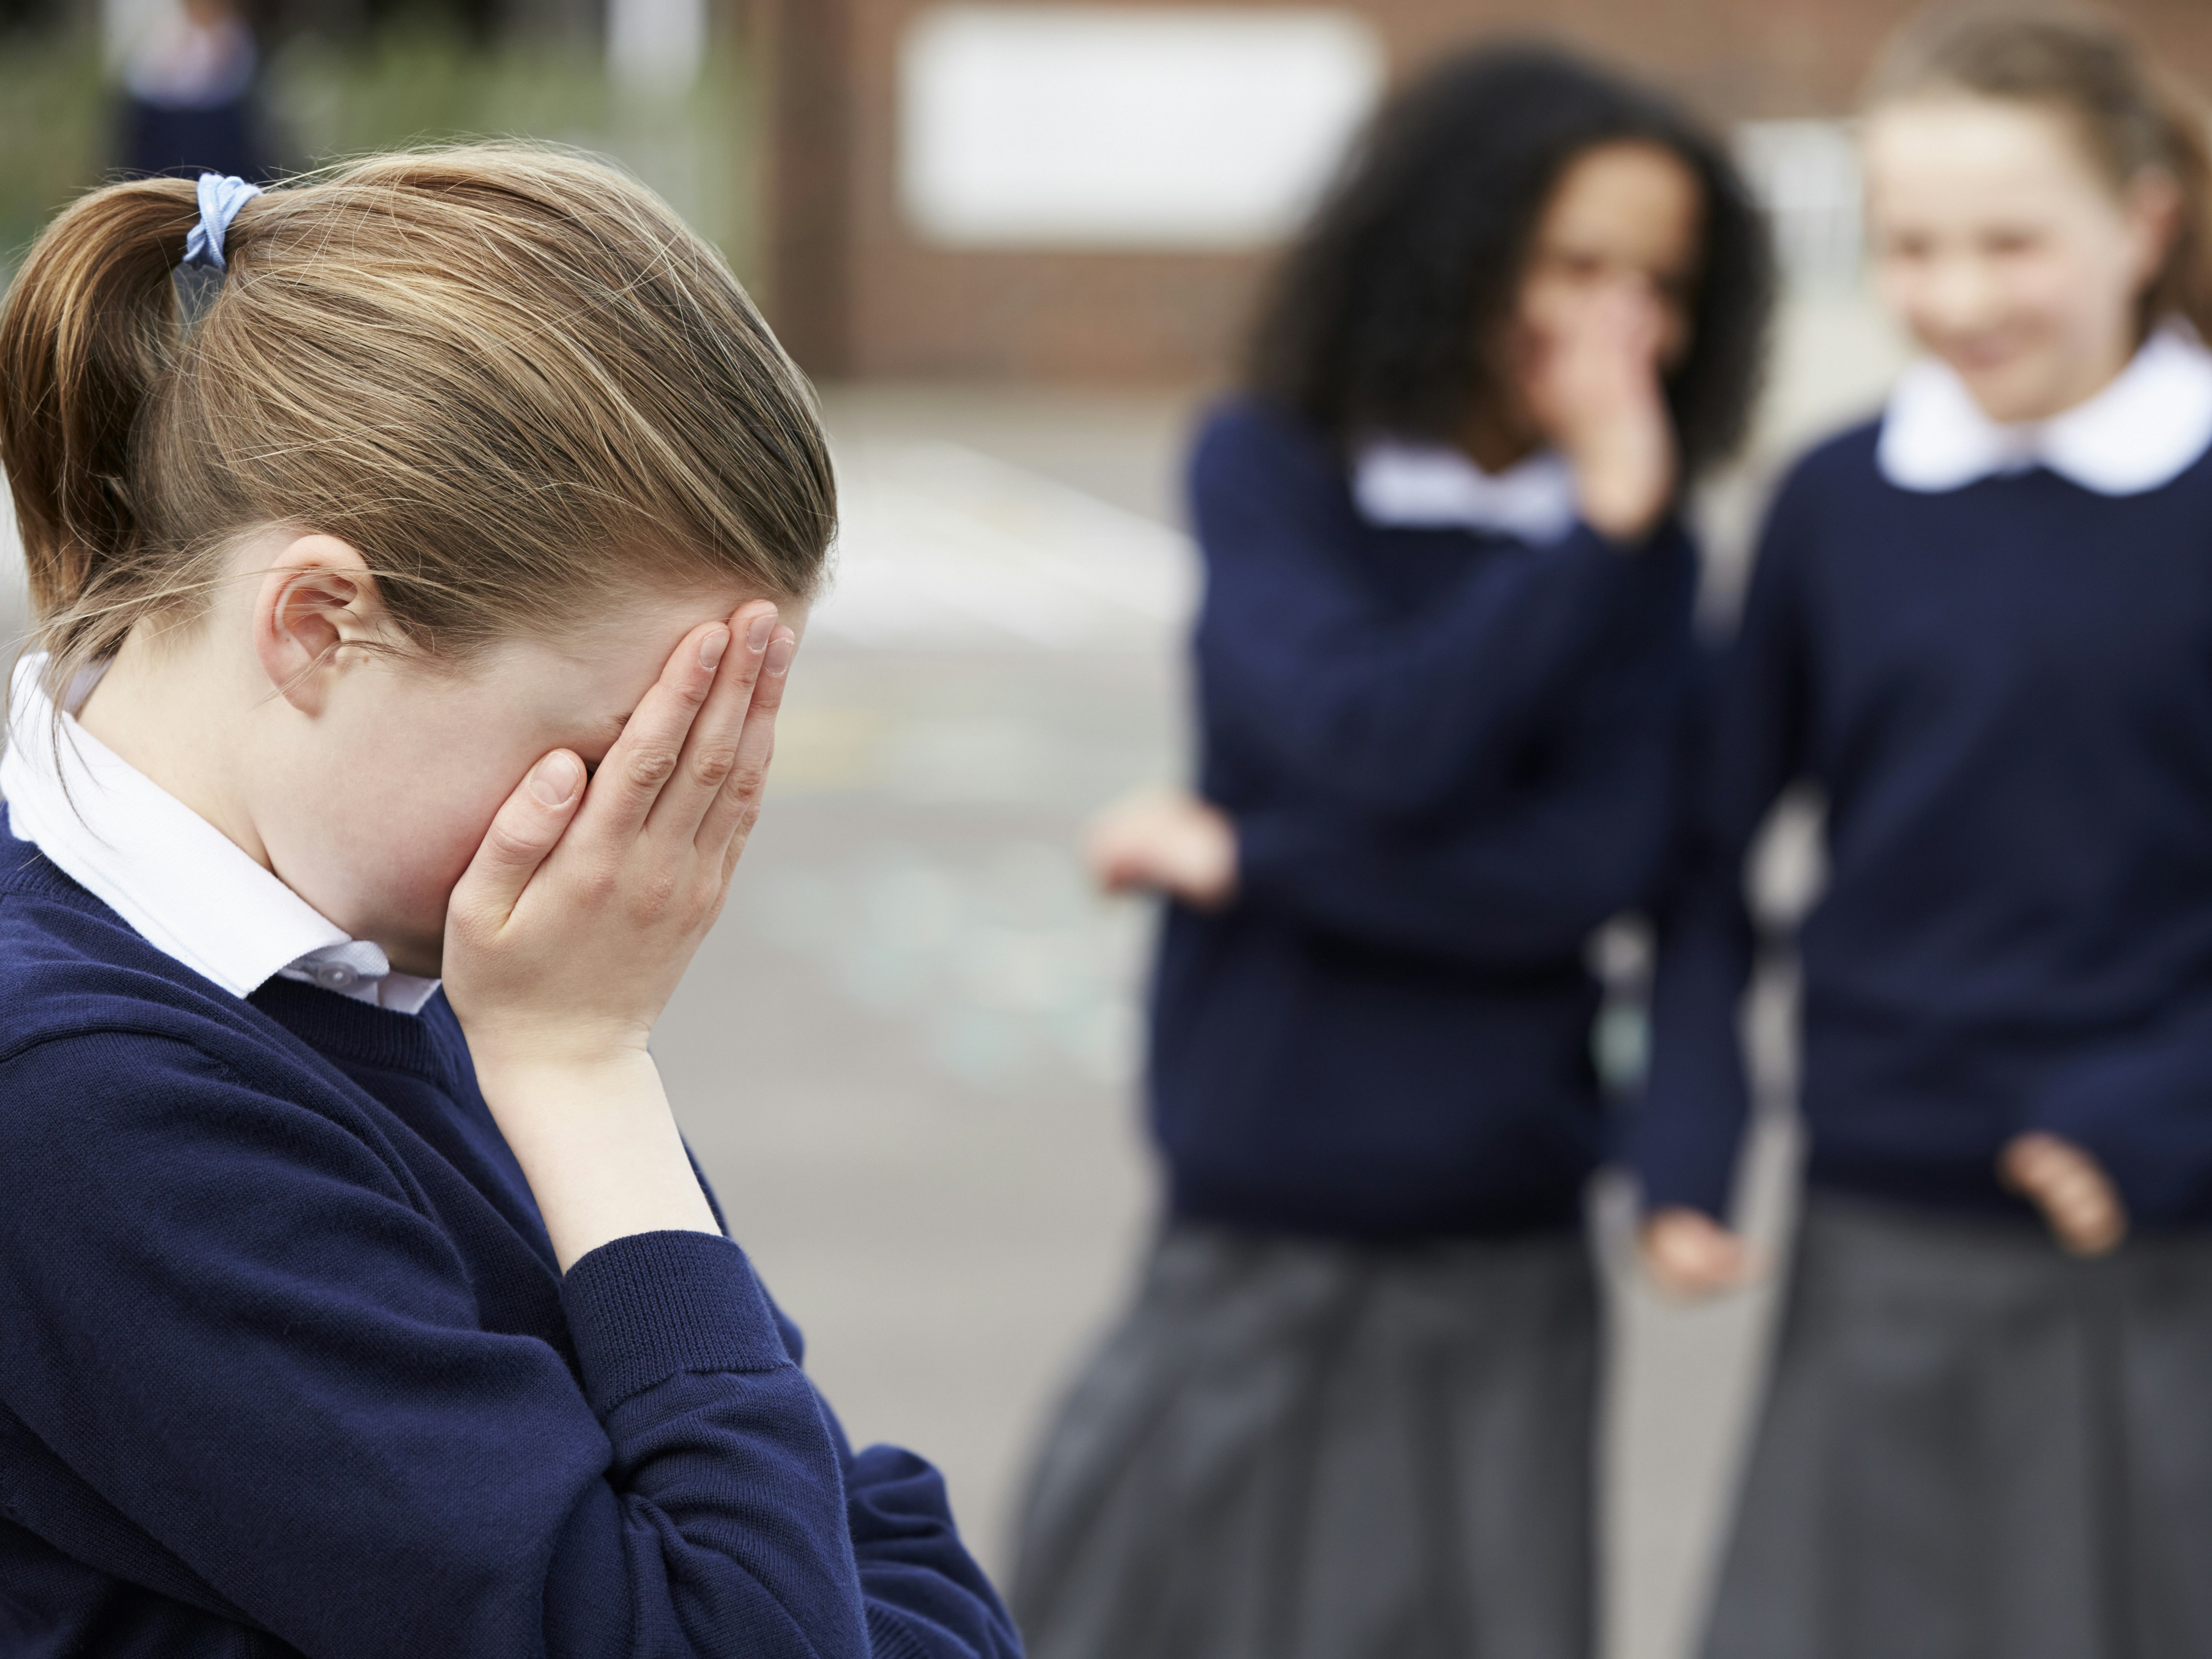 Girls with disability in Year 4-6 with significantly lower levels of teacher and family support showed higher levels of covert bullying. [Source: Shutterstock]
